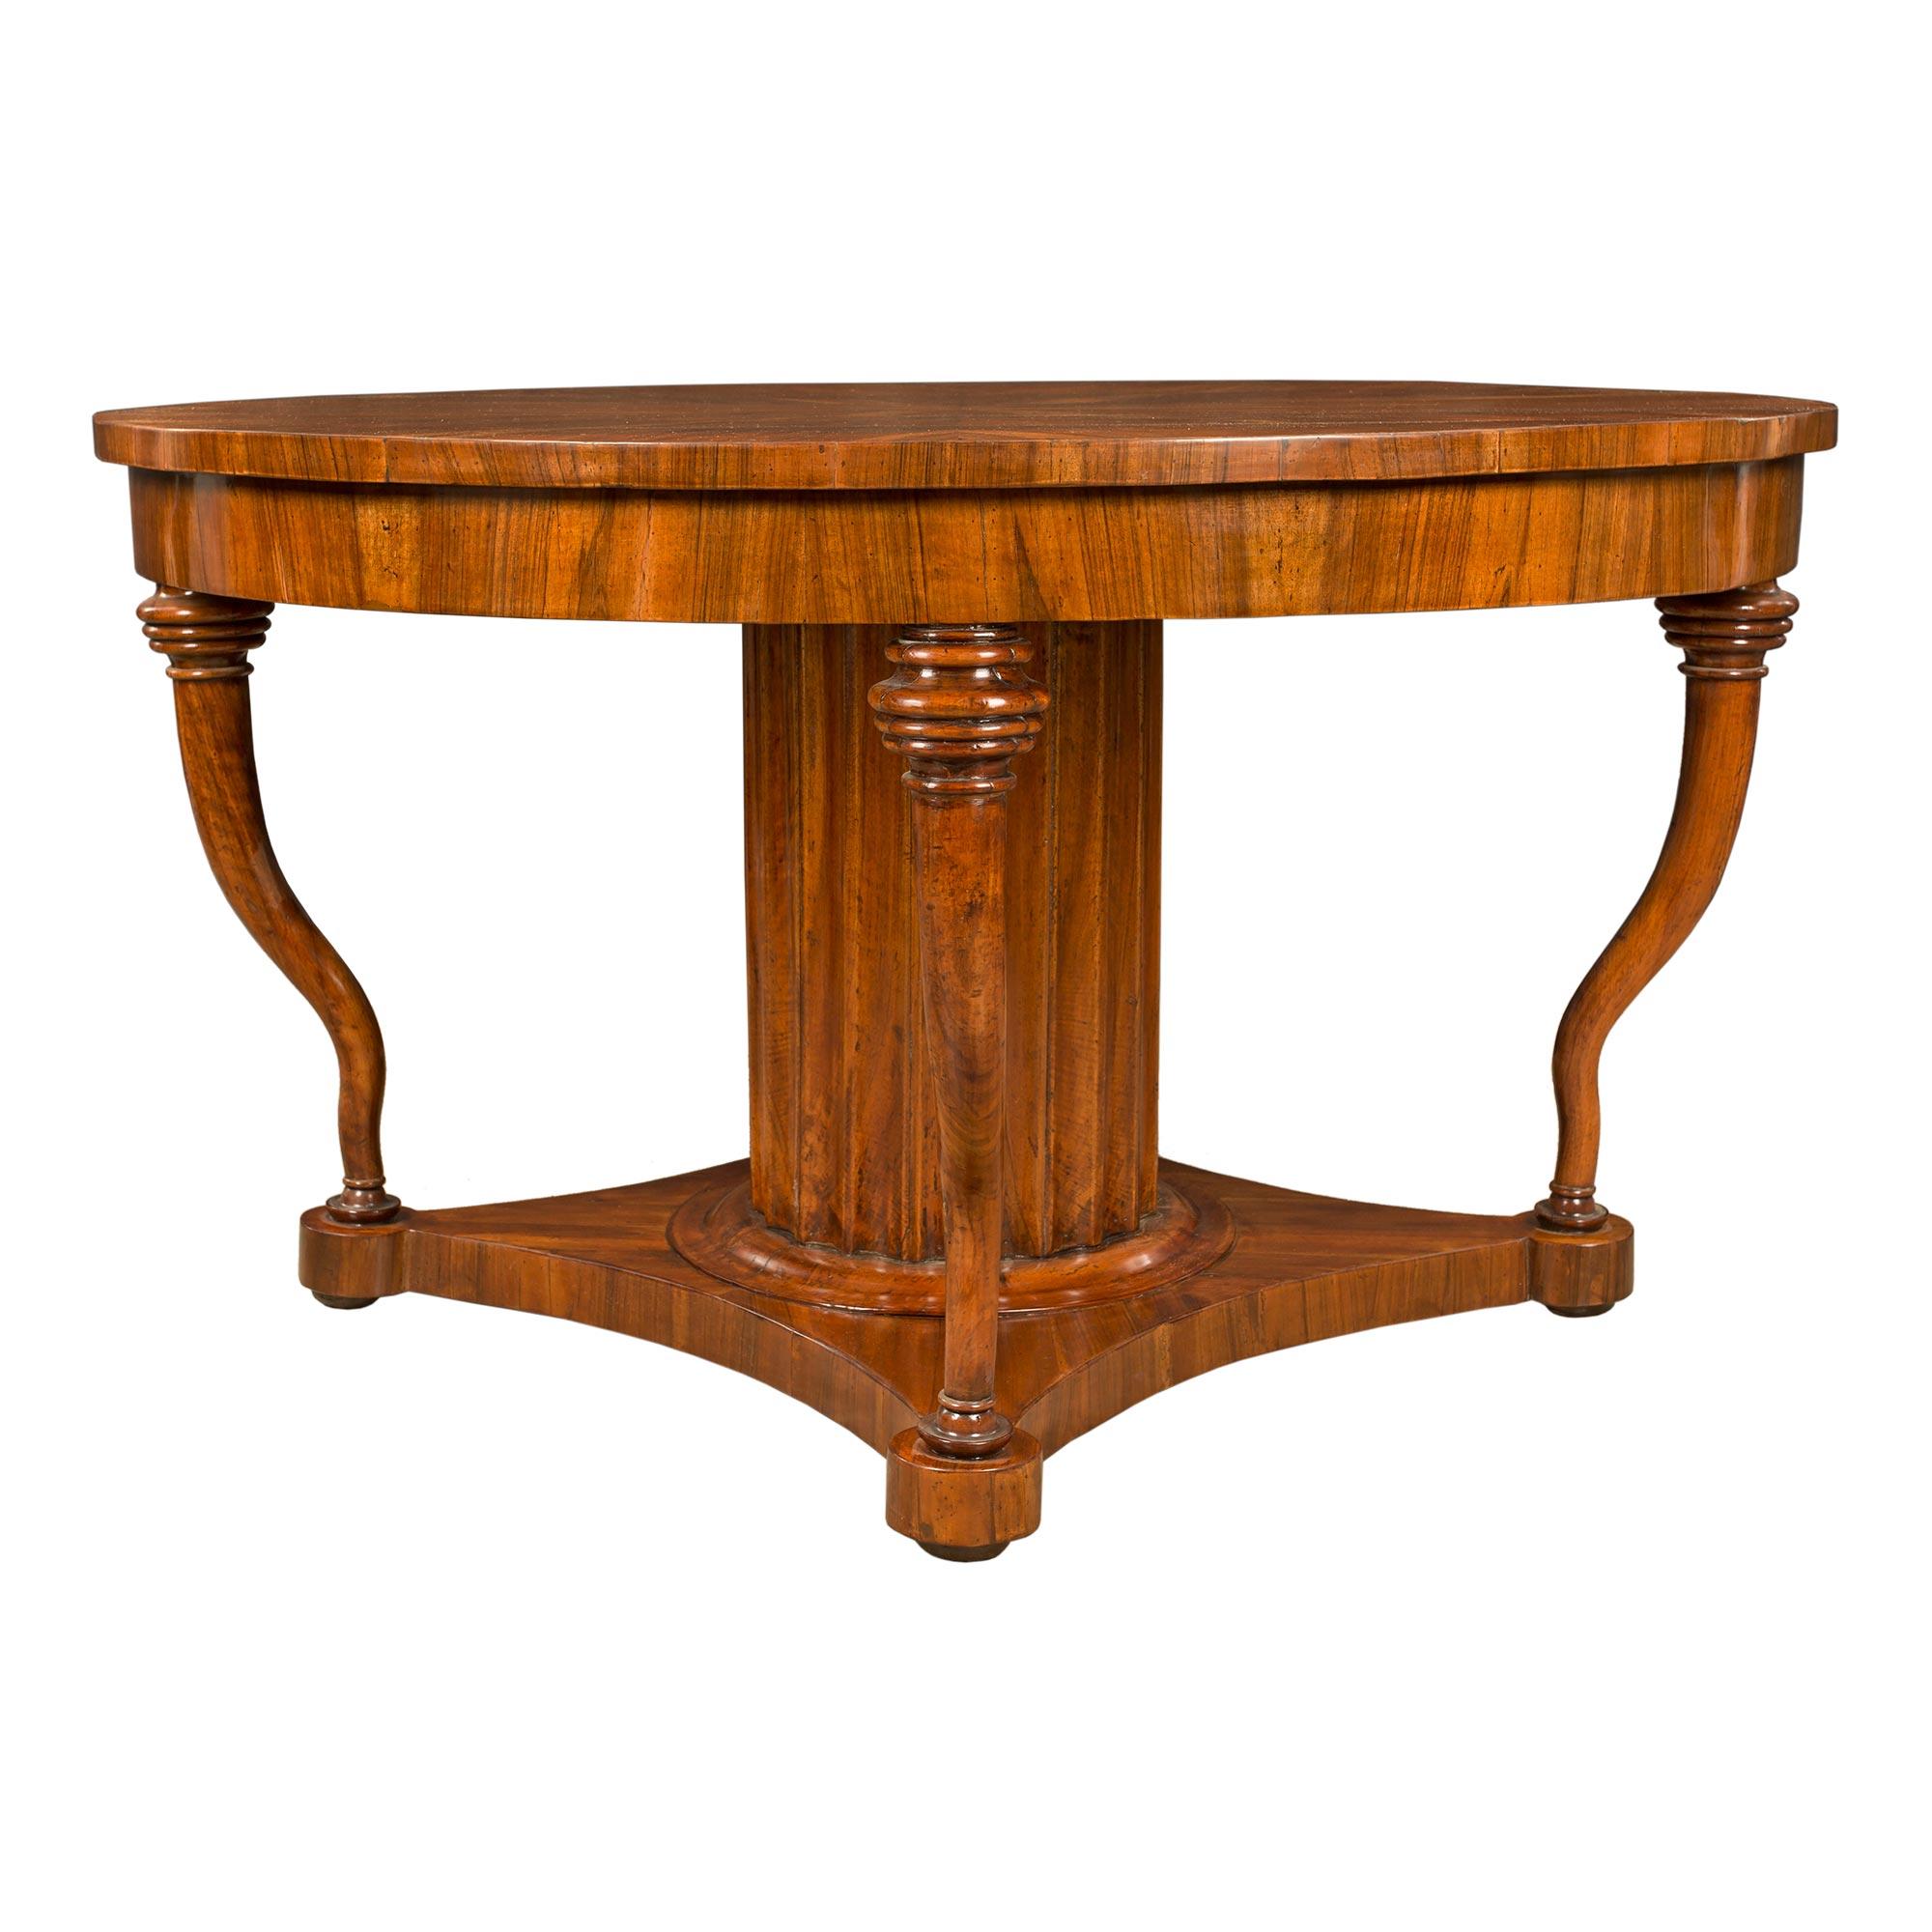 Italian Mid 18th Century Tuscan Walnut Center Table In Good Condition For Sale In West Palm Beach, FL